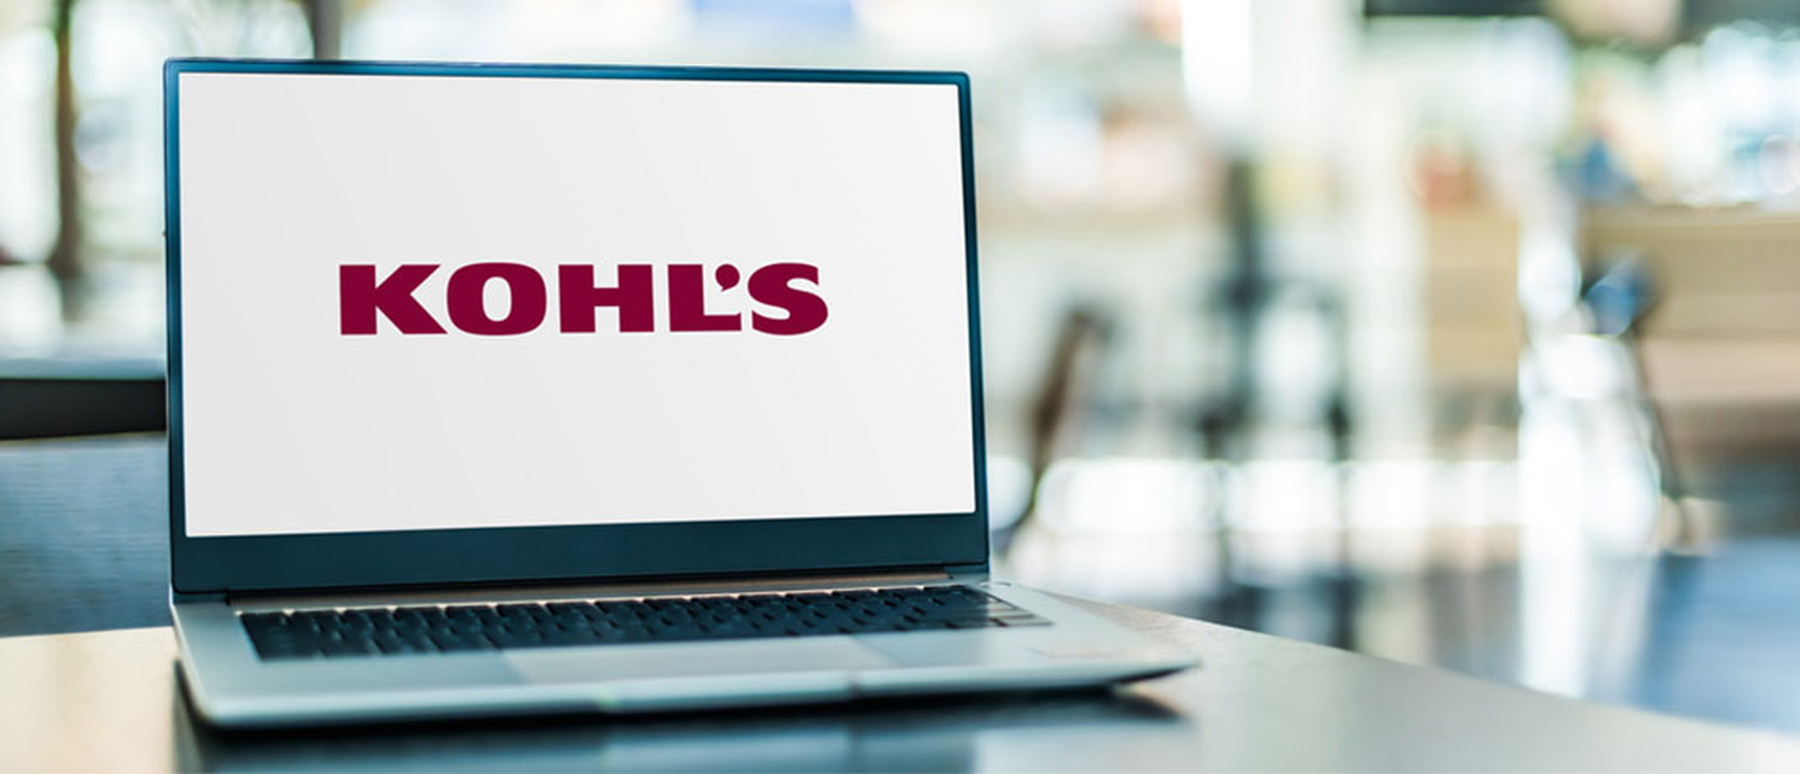 Get Paid to Shop with Kohl’s Cash